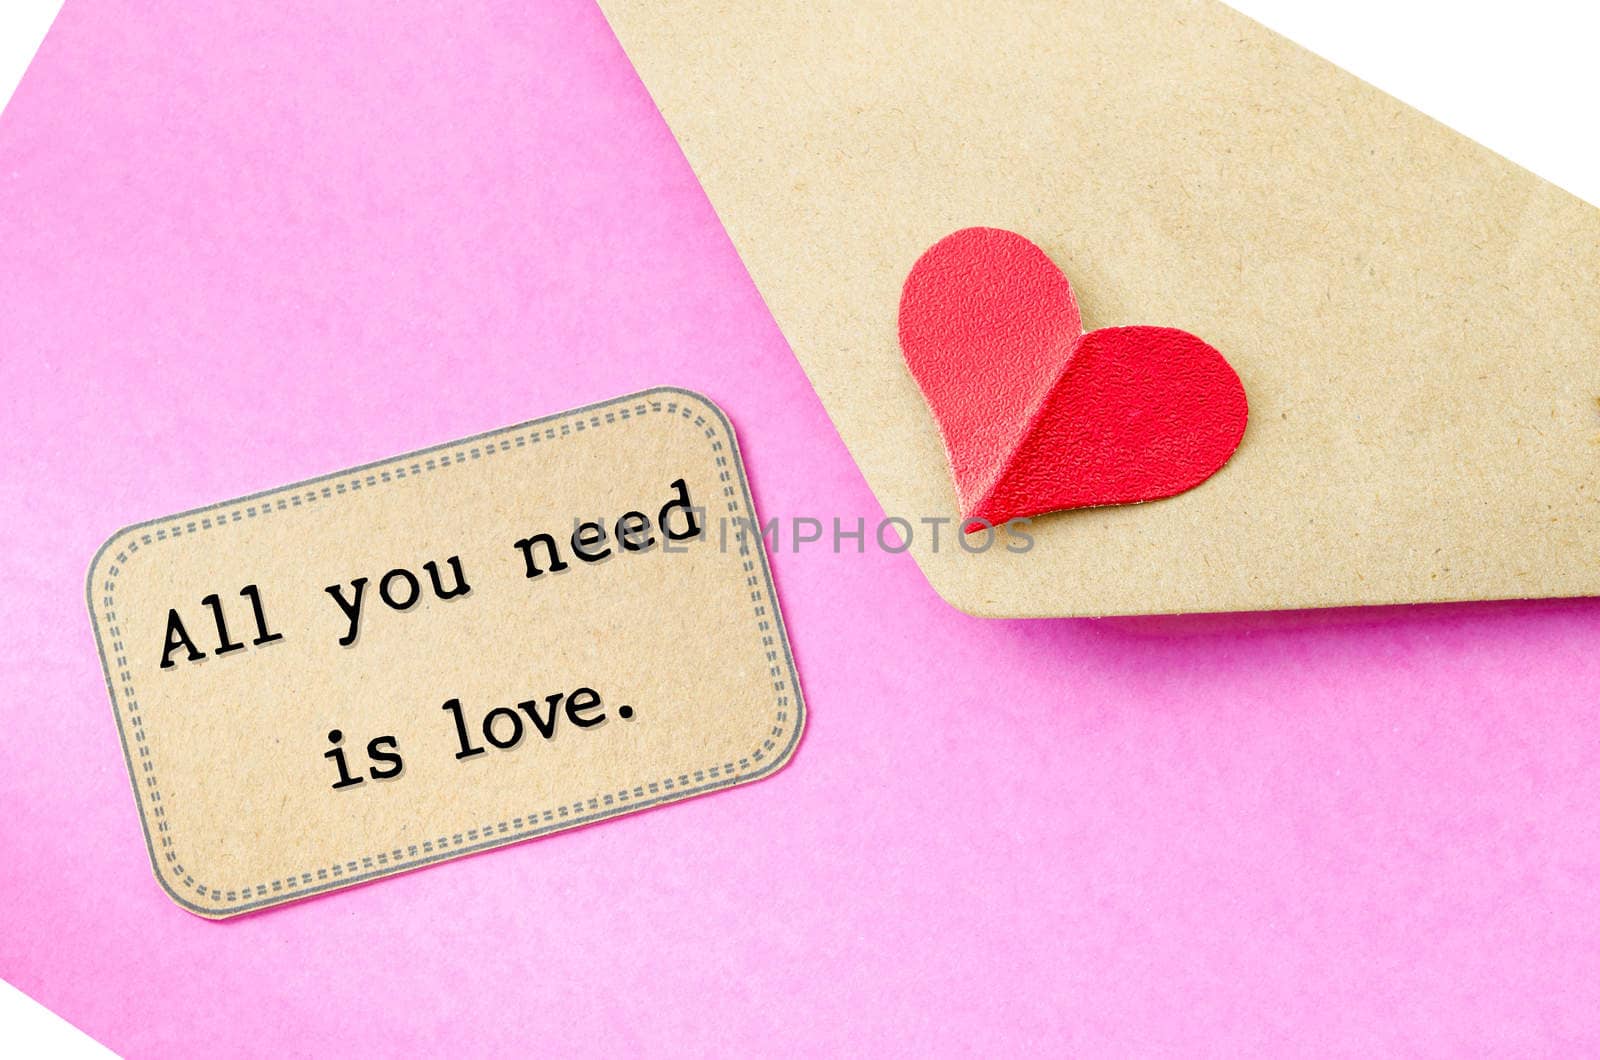 All you need is love. Love letter. by Gamjai